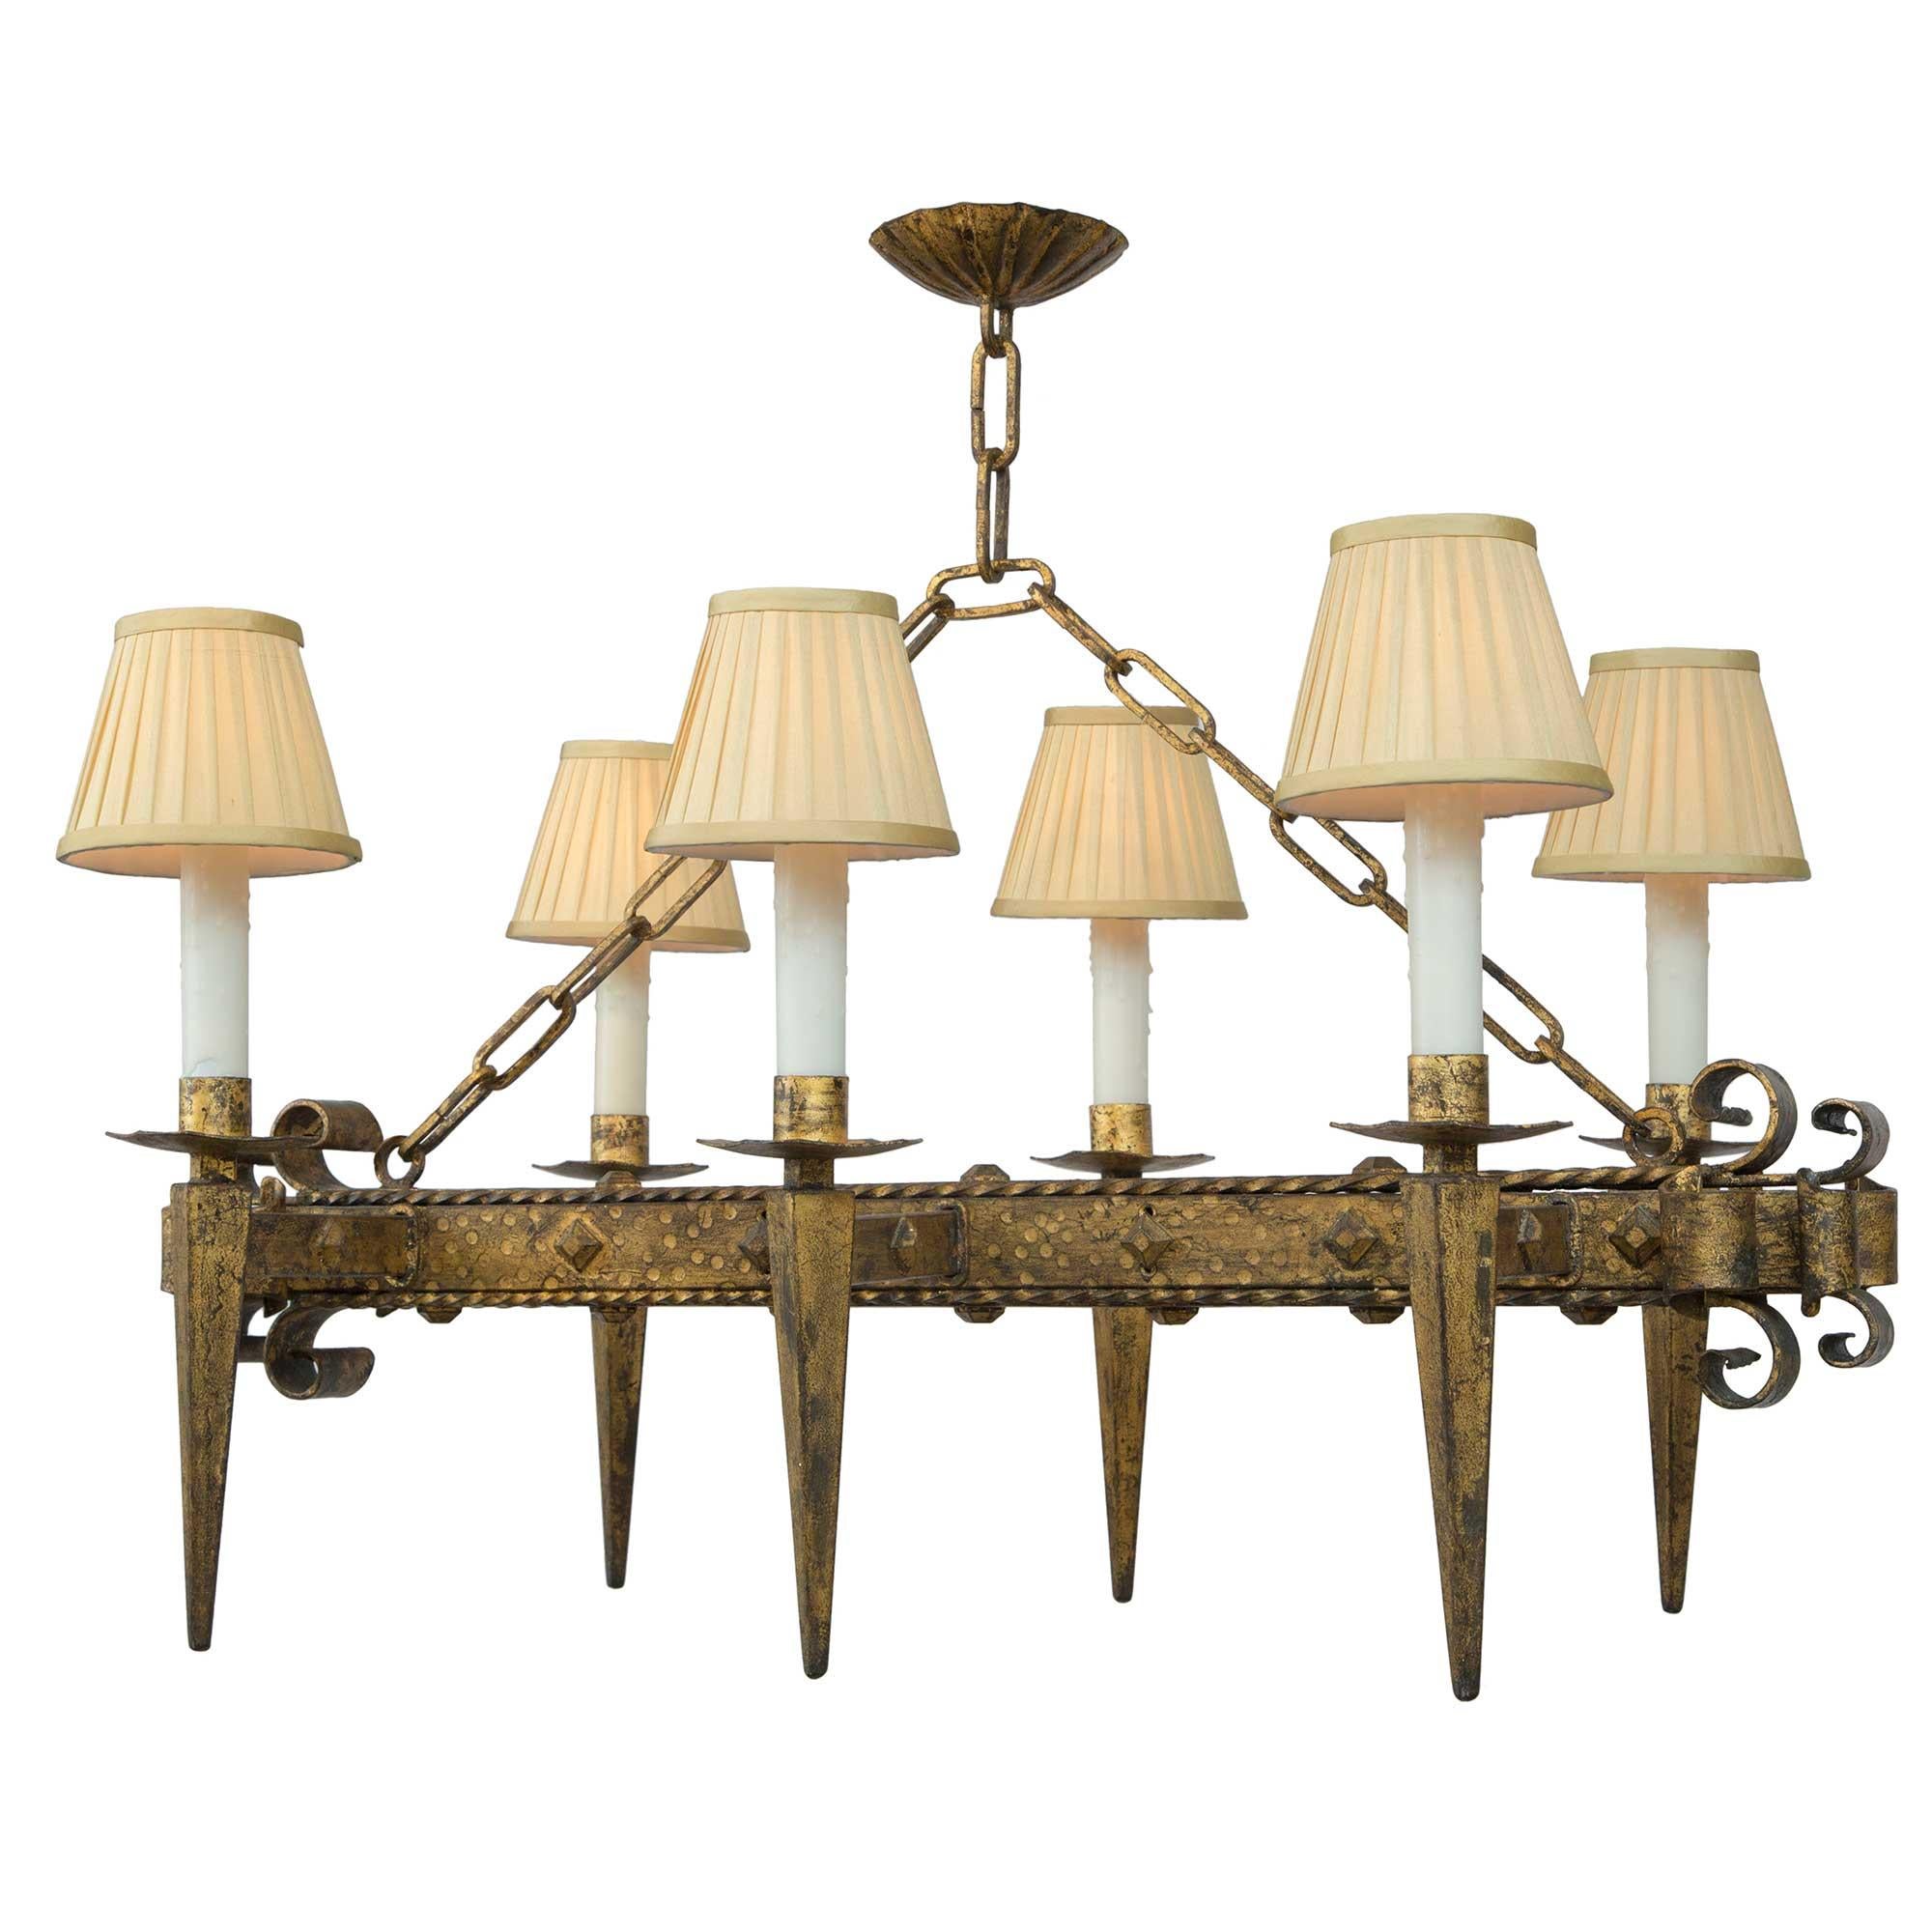 A handsome French 19th century Renaissance st. gilt iron six-arm chandelier. The rectangular-shaped chandelier has a square central hammered fut decorated by diamond-shaped buttons and twisted ribbon edges. The two end with wonderful and decorative